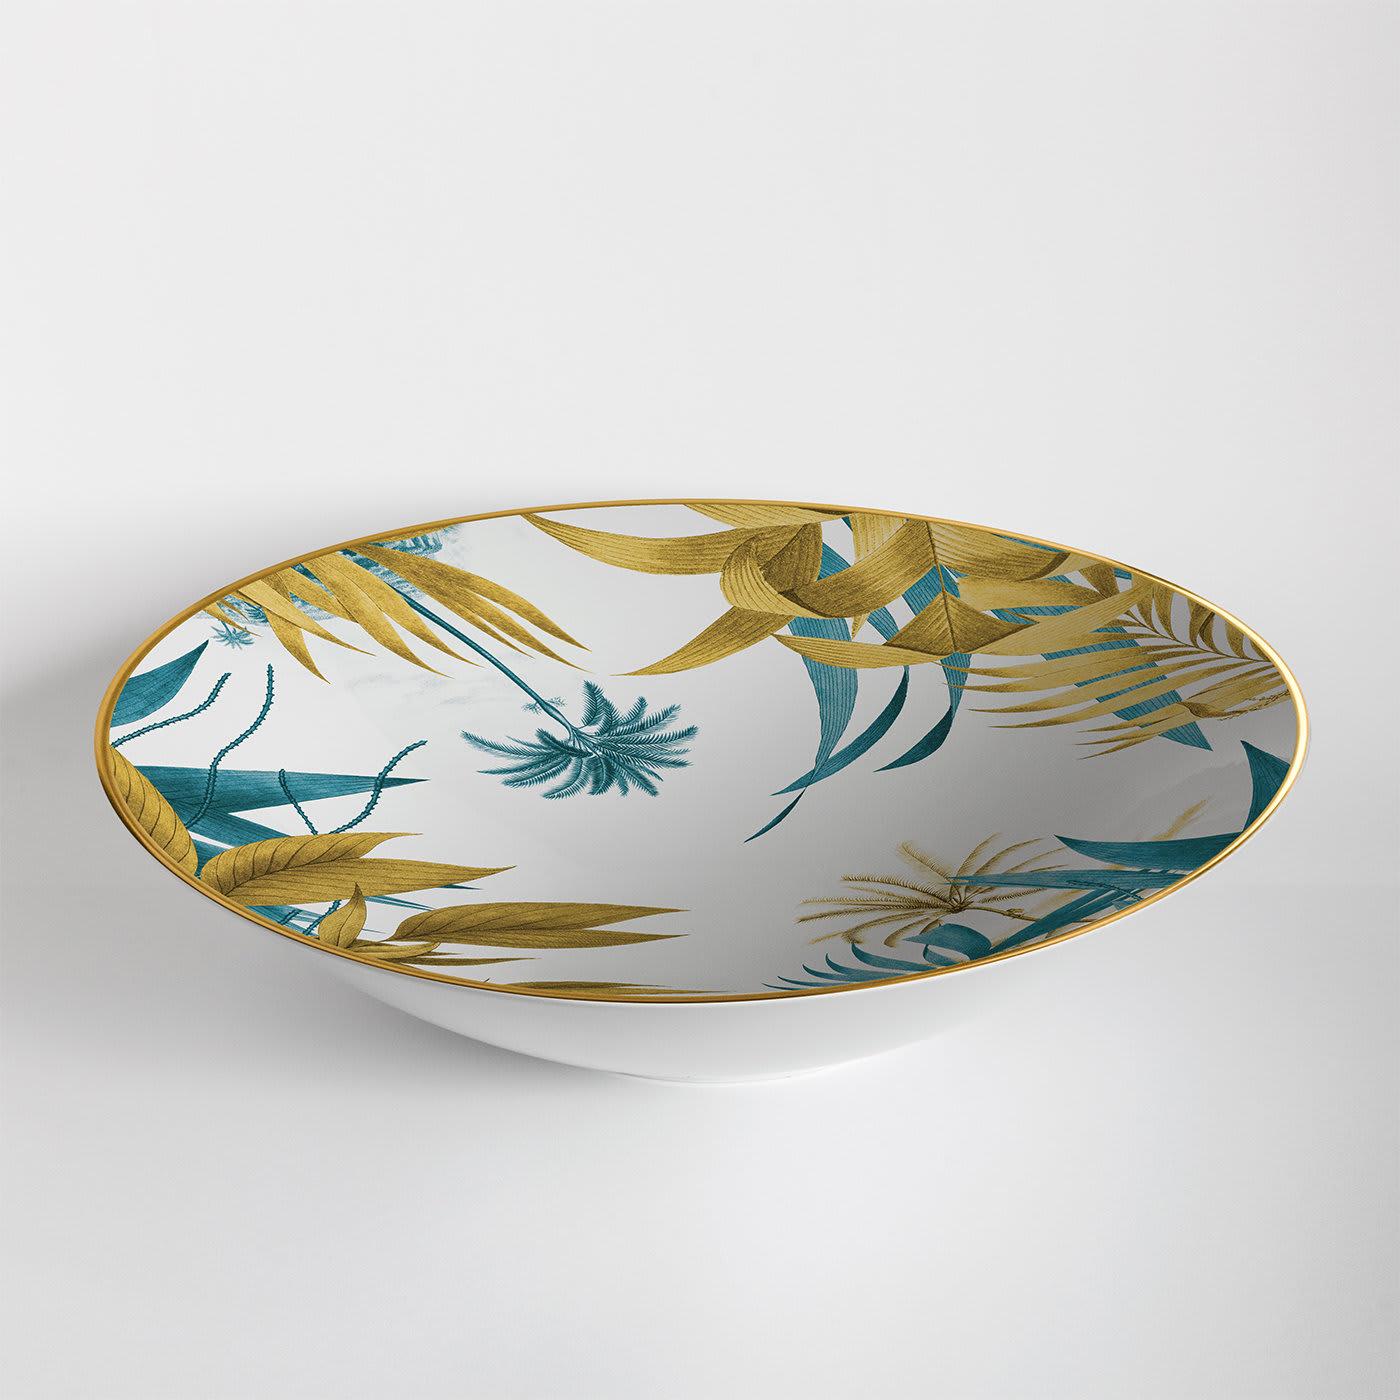 Set on a refined dining room table as a centerpiece or used as a fruit serving plate, this elegant bowl will make a singular addition to any traditional or modern decor. Handmade of white porcelain, it features a delicate yet captivating image of a